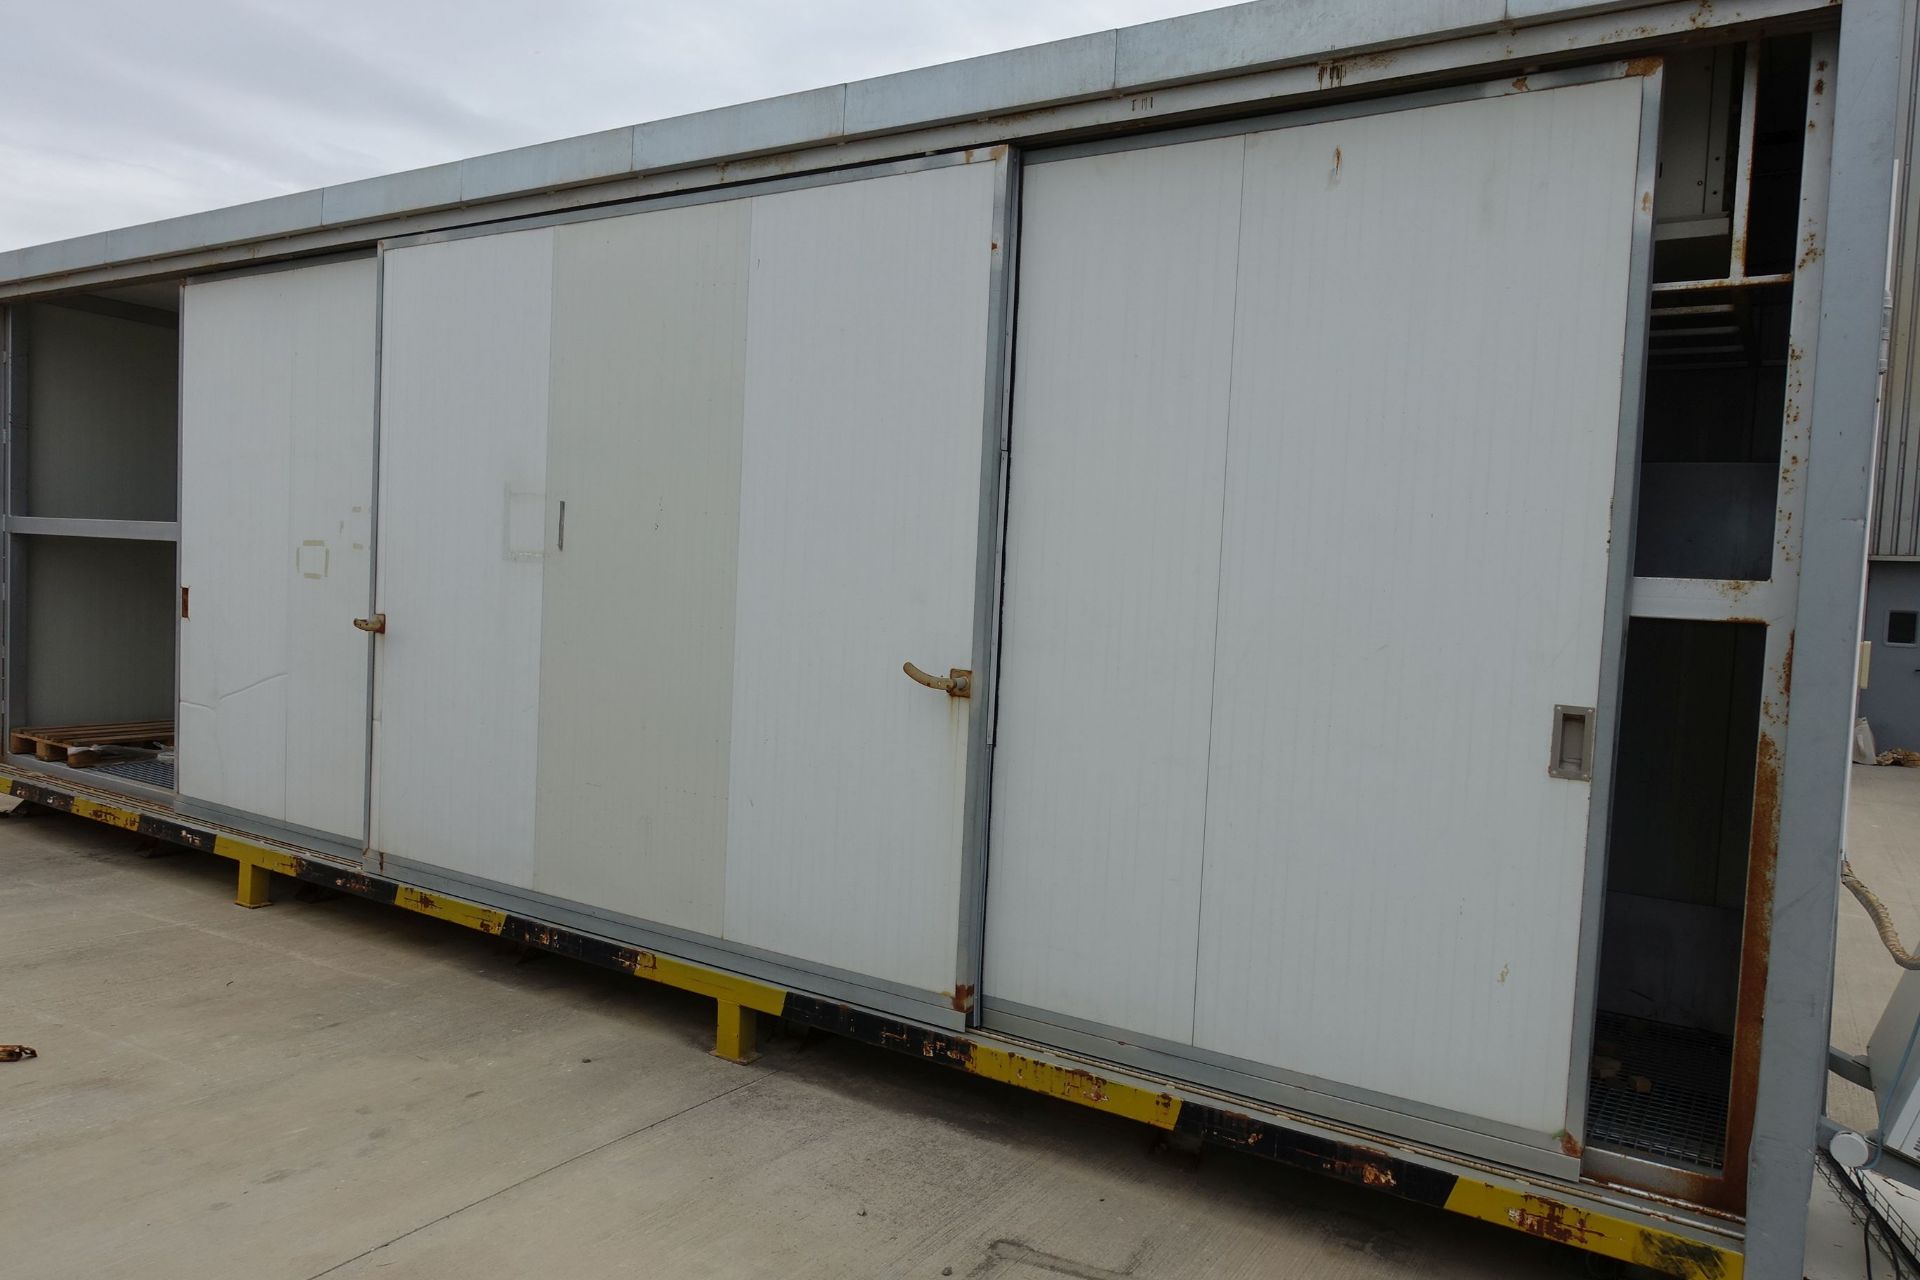 Intracon Chilled Container, 9m Long x 1.5m Deep x 3m High (aproximaely) with MDH-F-2034A Chiller, - Image 2 of 8